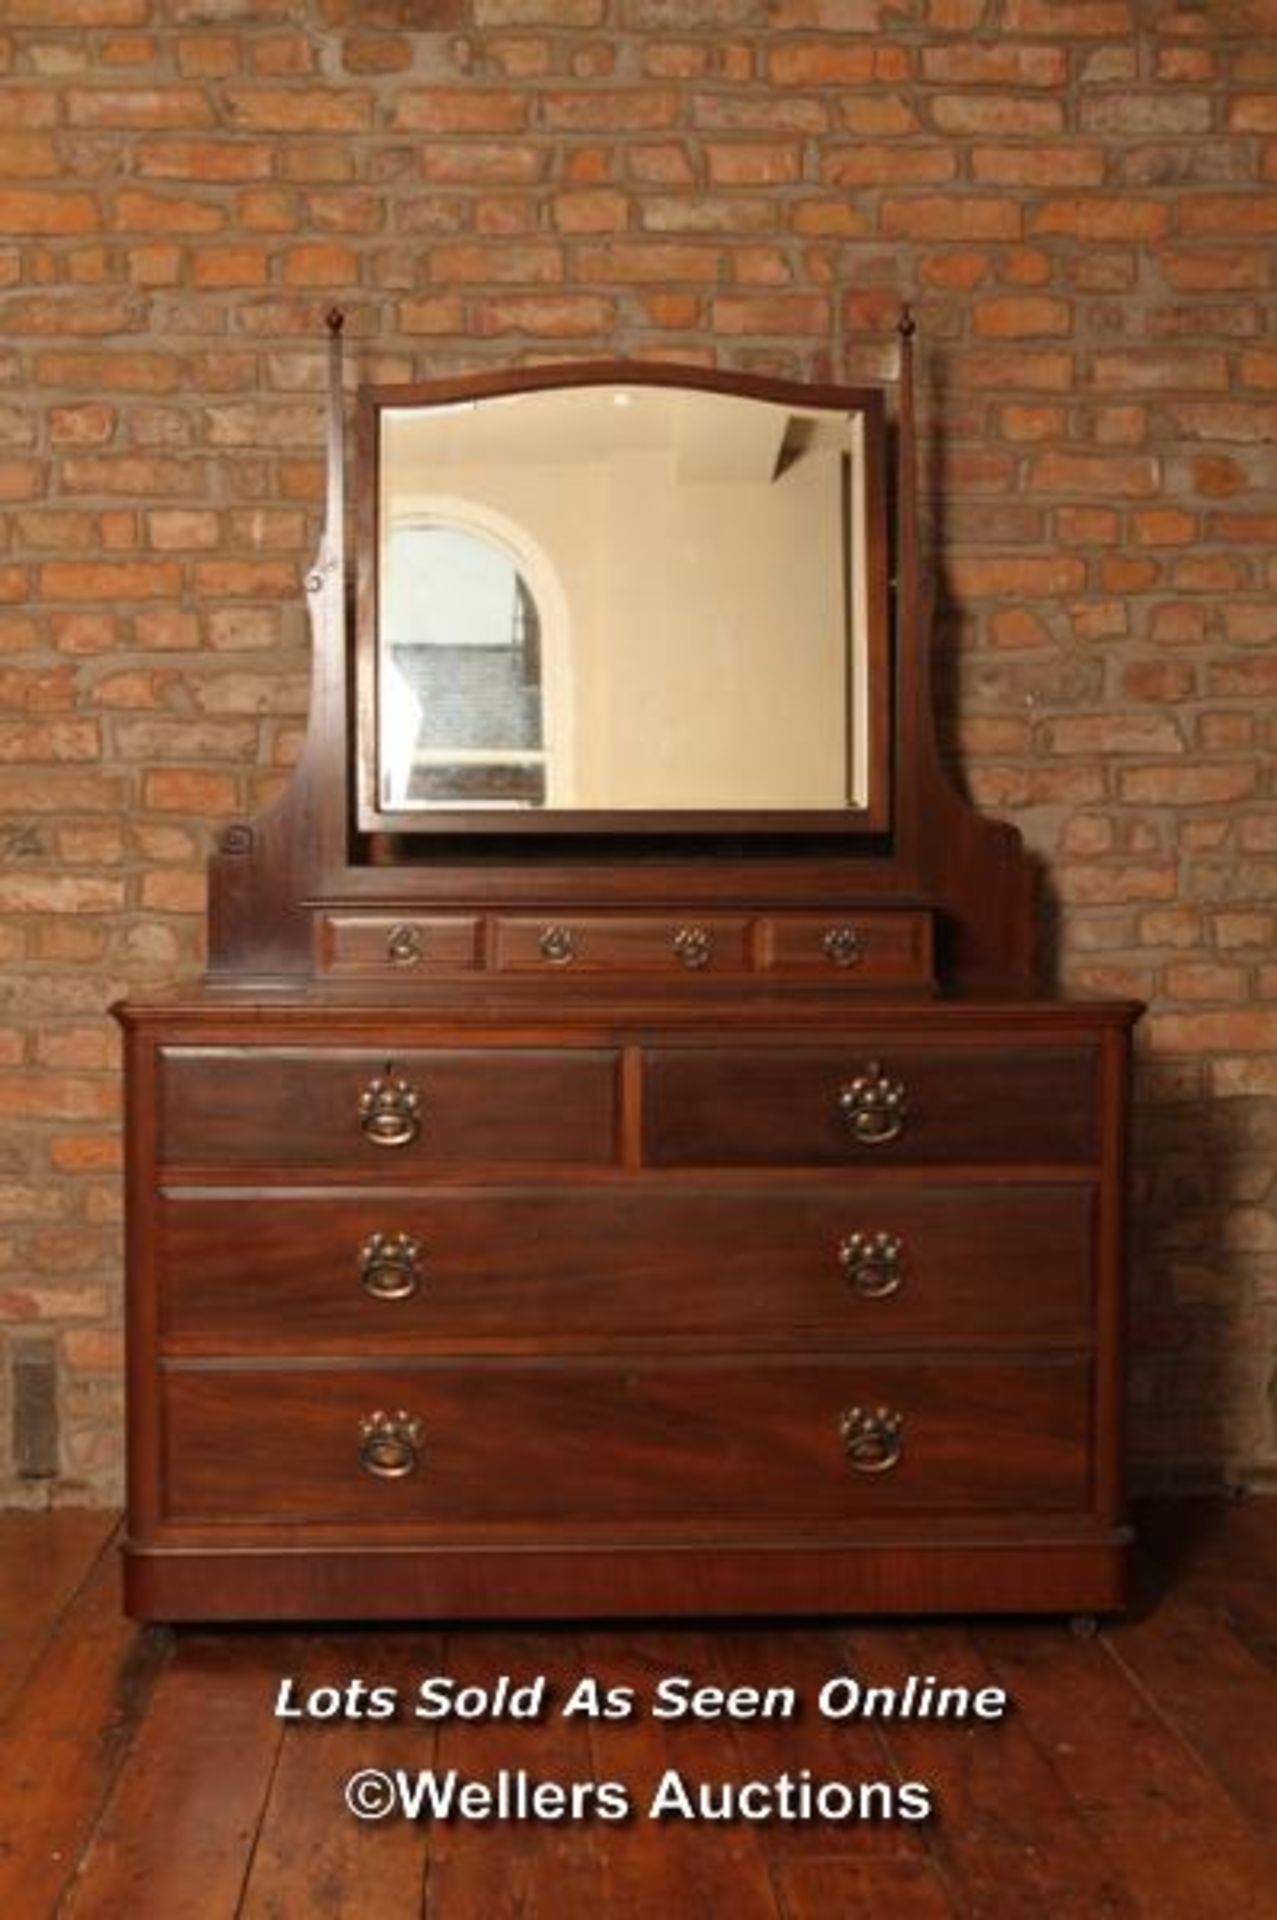 *ART NOUVEAU TEAK DRESSING TABLE, WITH SURFACE MOUNTED MIRROR AND STORAGE DRAWERS WITH ORIGINAL